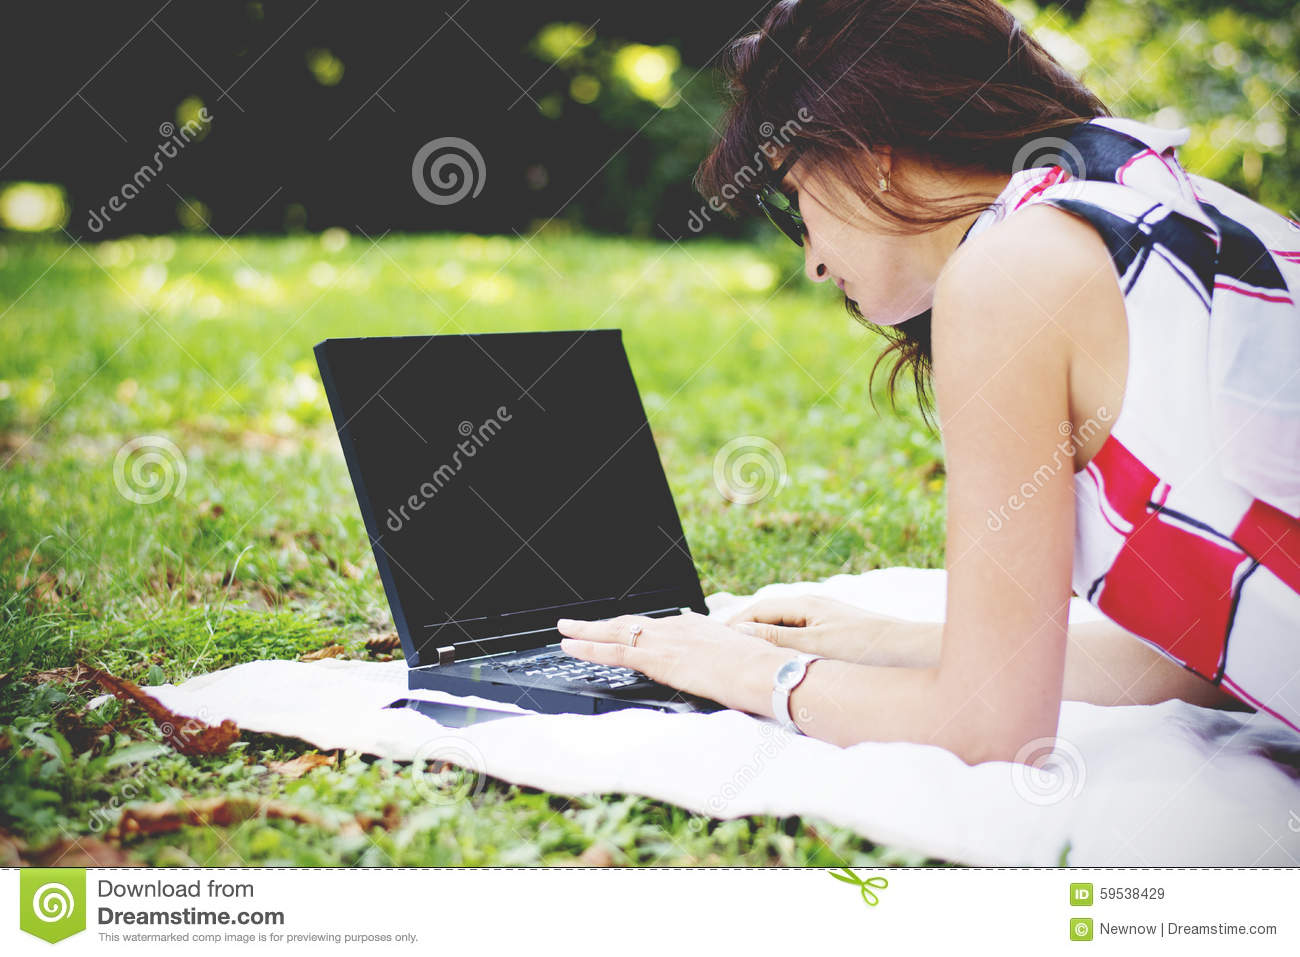 Young Brunette Woman In Park Using Laptop While Relaxing On A Blanket